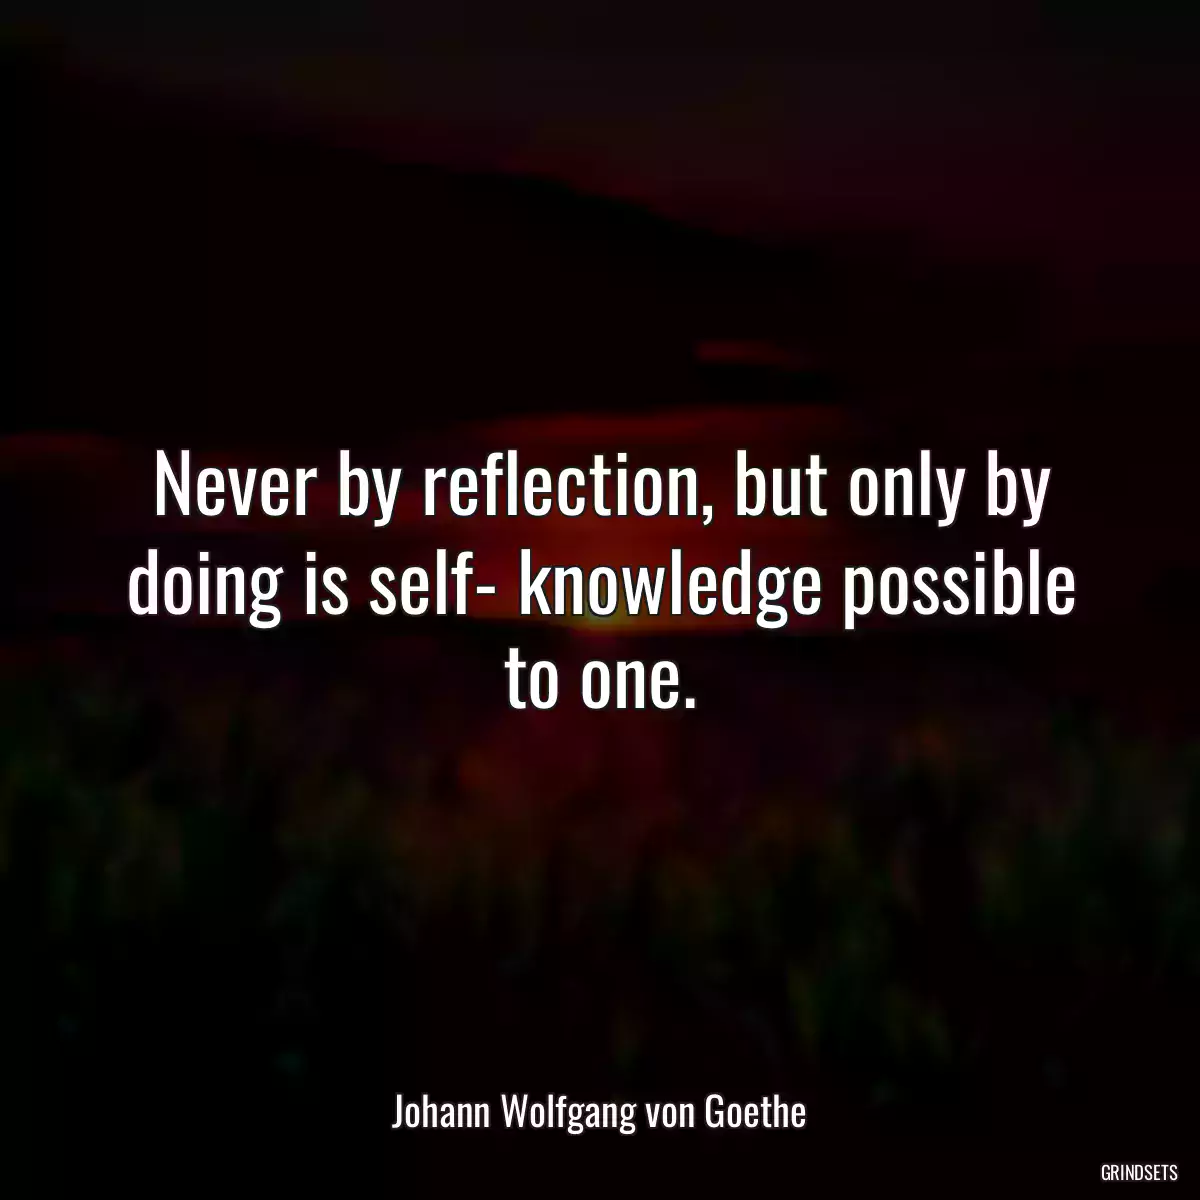 Never by reflection, but only by doing is self- knowledge possible to one.